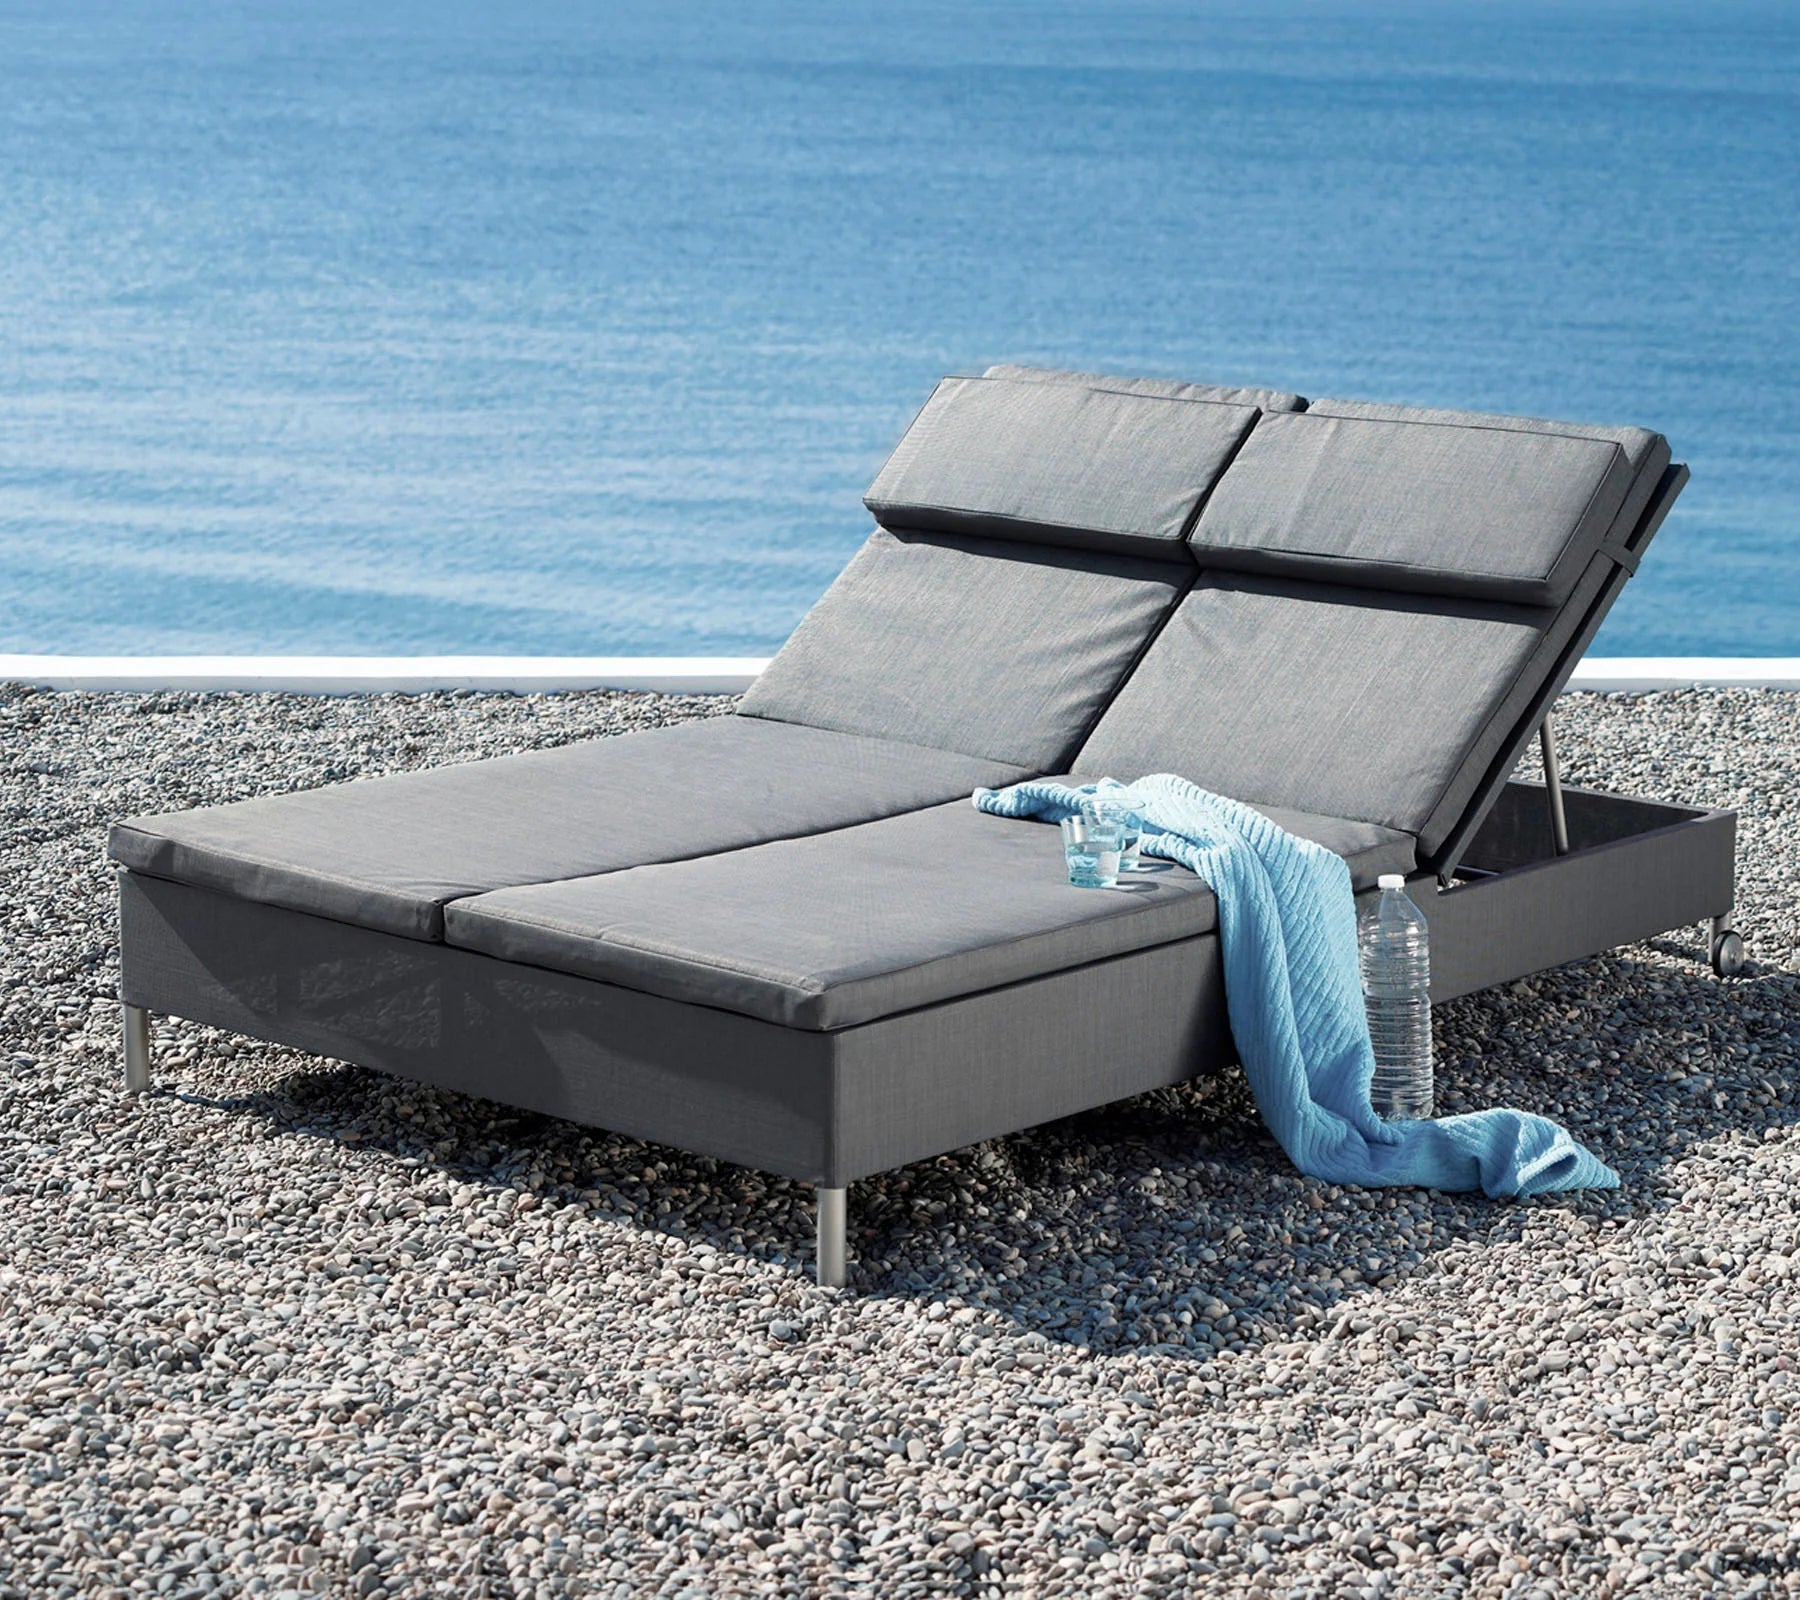   Boxhill's Rest grey outdoor chaise lounge | double sunbed blue fabric and glass of water placed on rocky shore